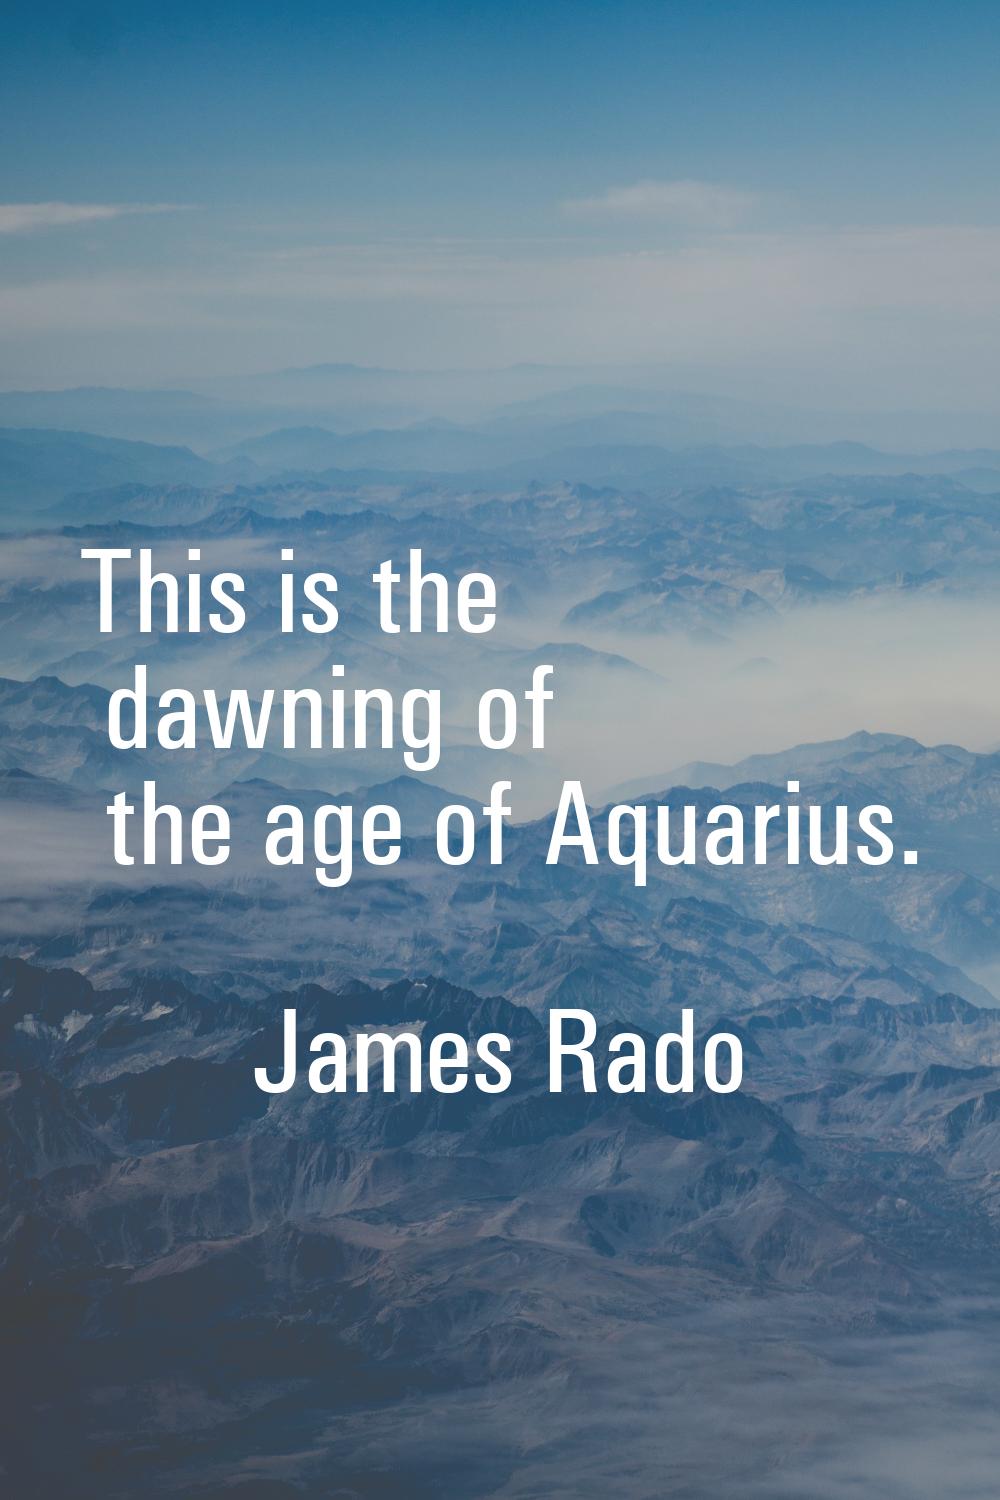 This is the dawning of the age of Aquarius.